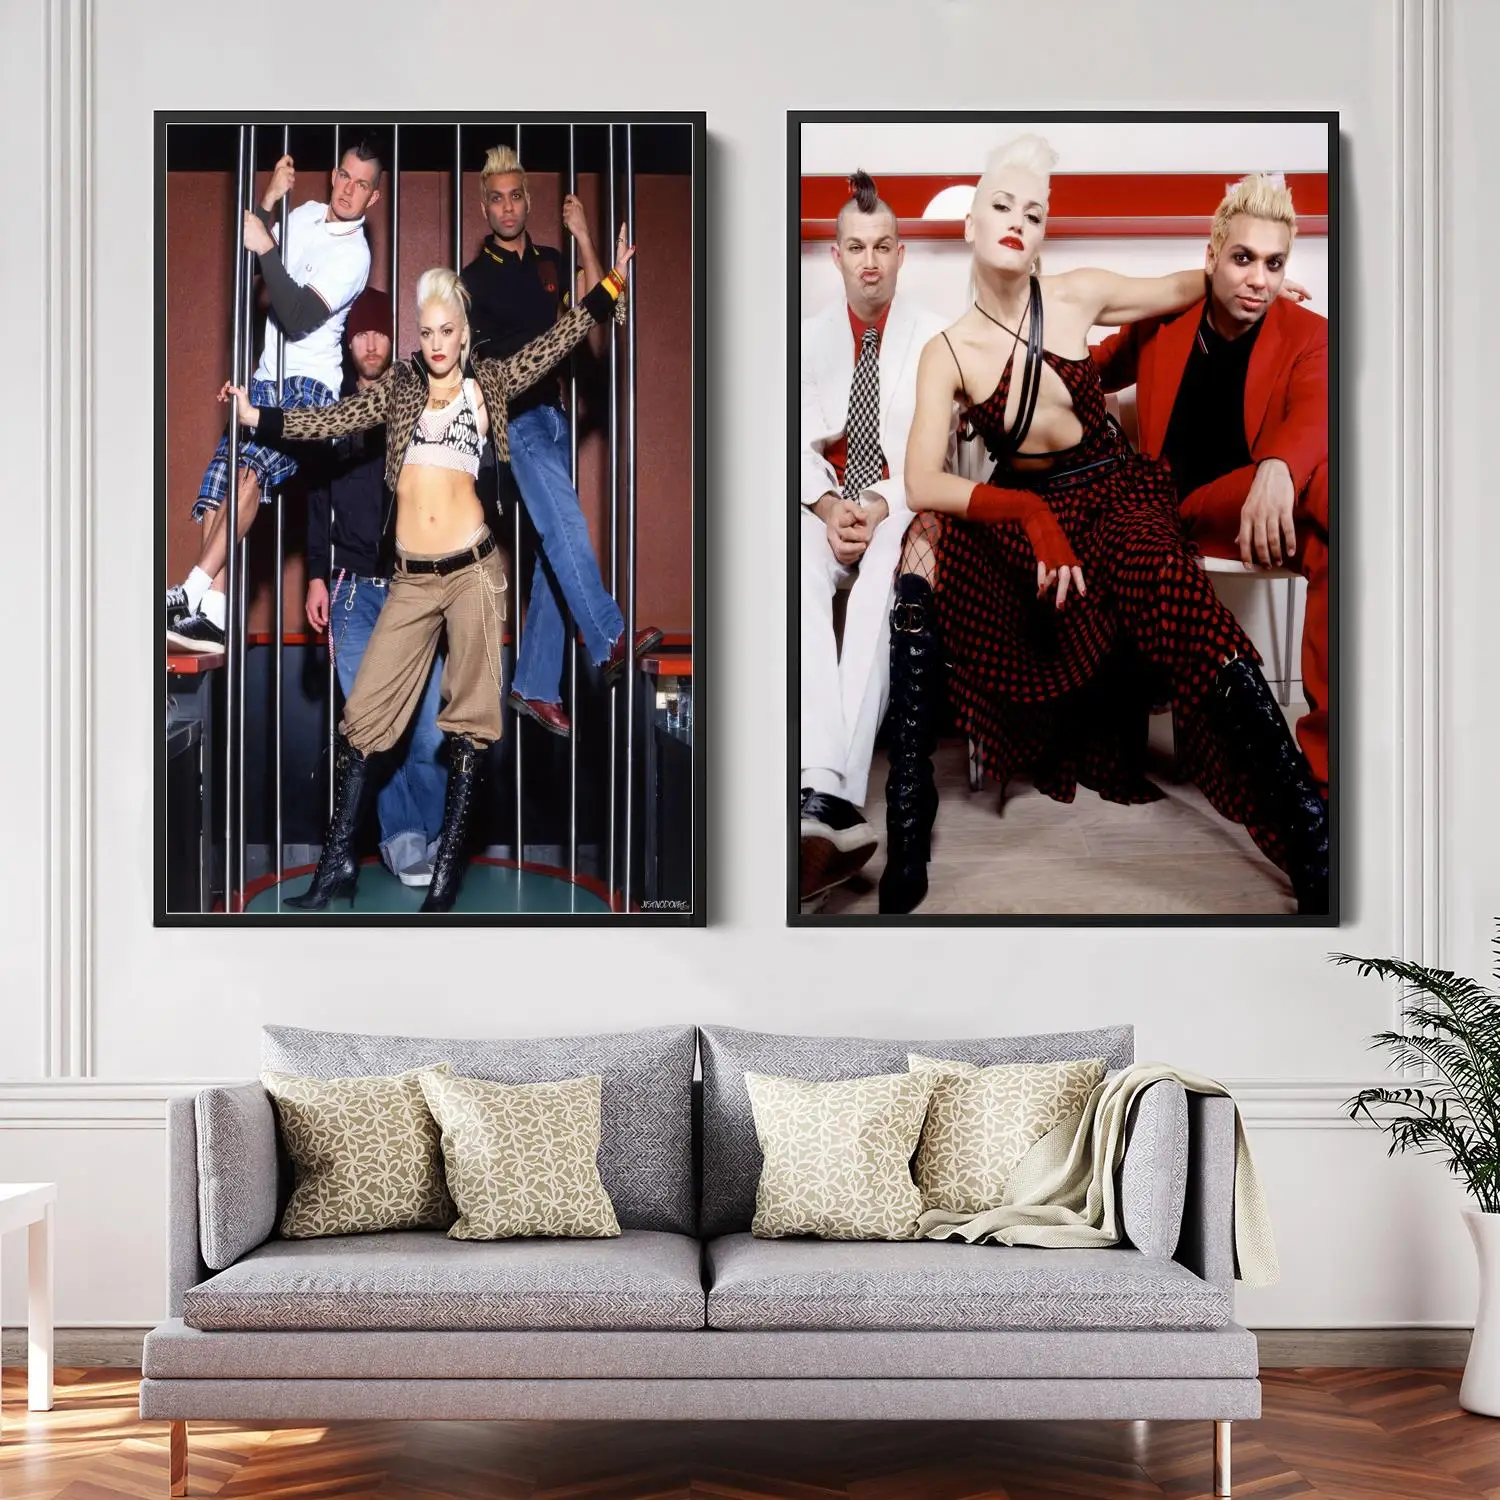 

no doubt Singer Decorative Canvas Posters Room Bar Cafe Decor Gift Print Art Wall Paintings